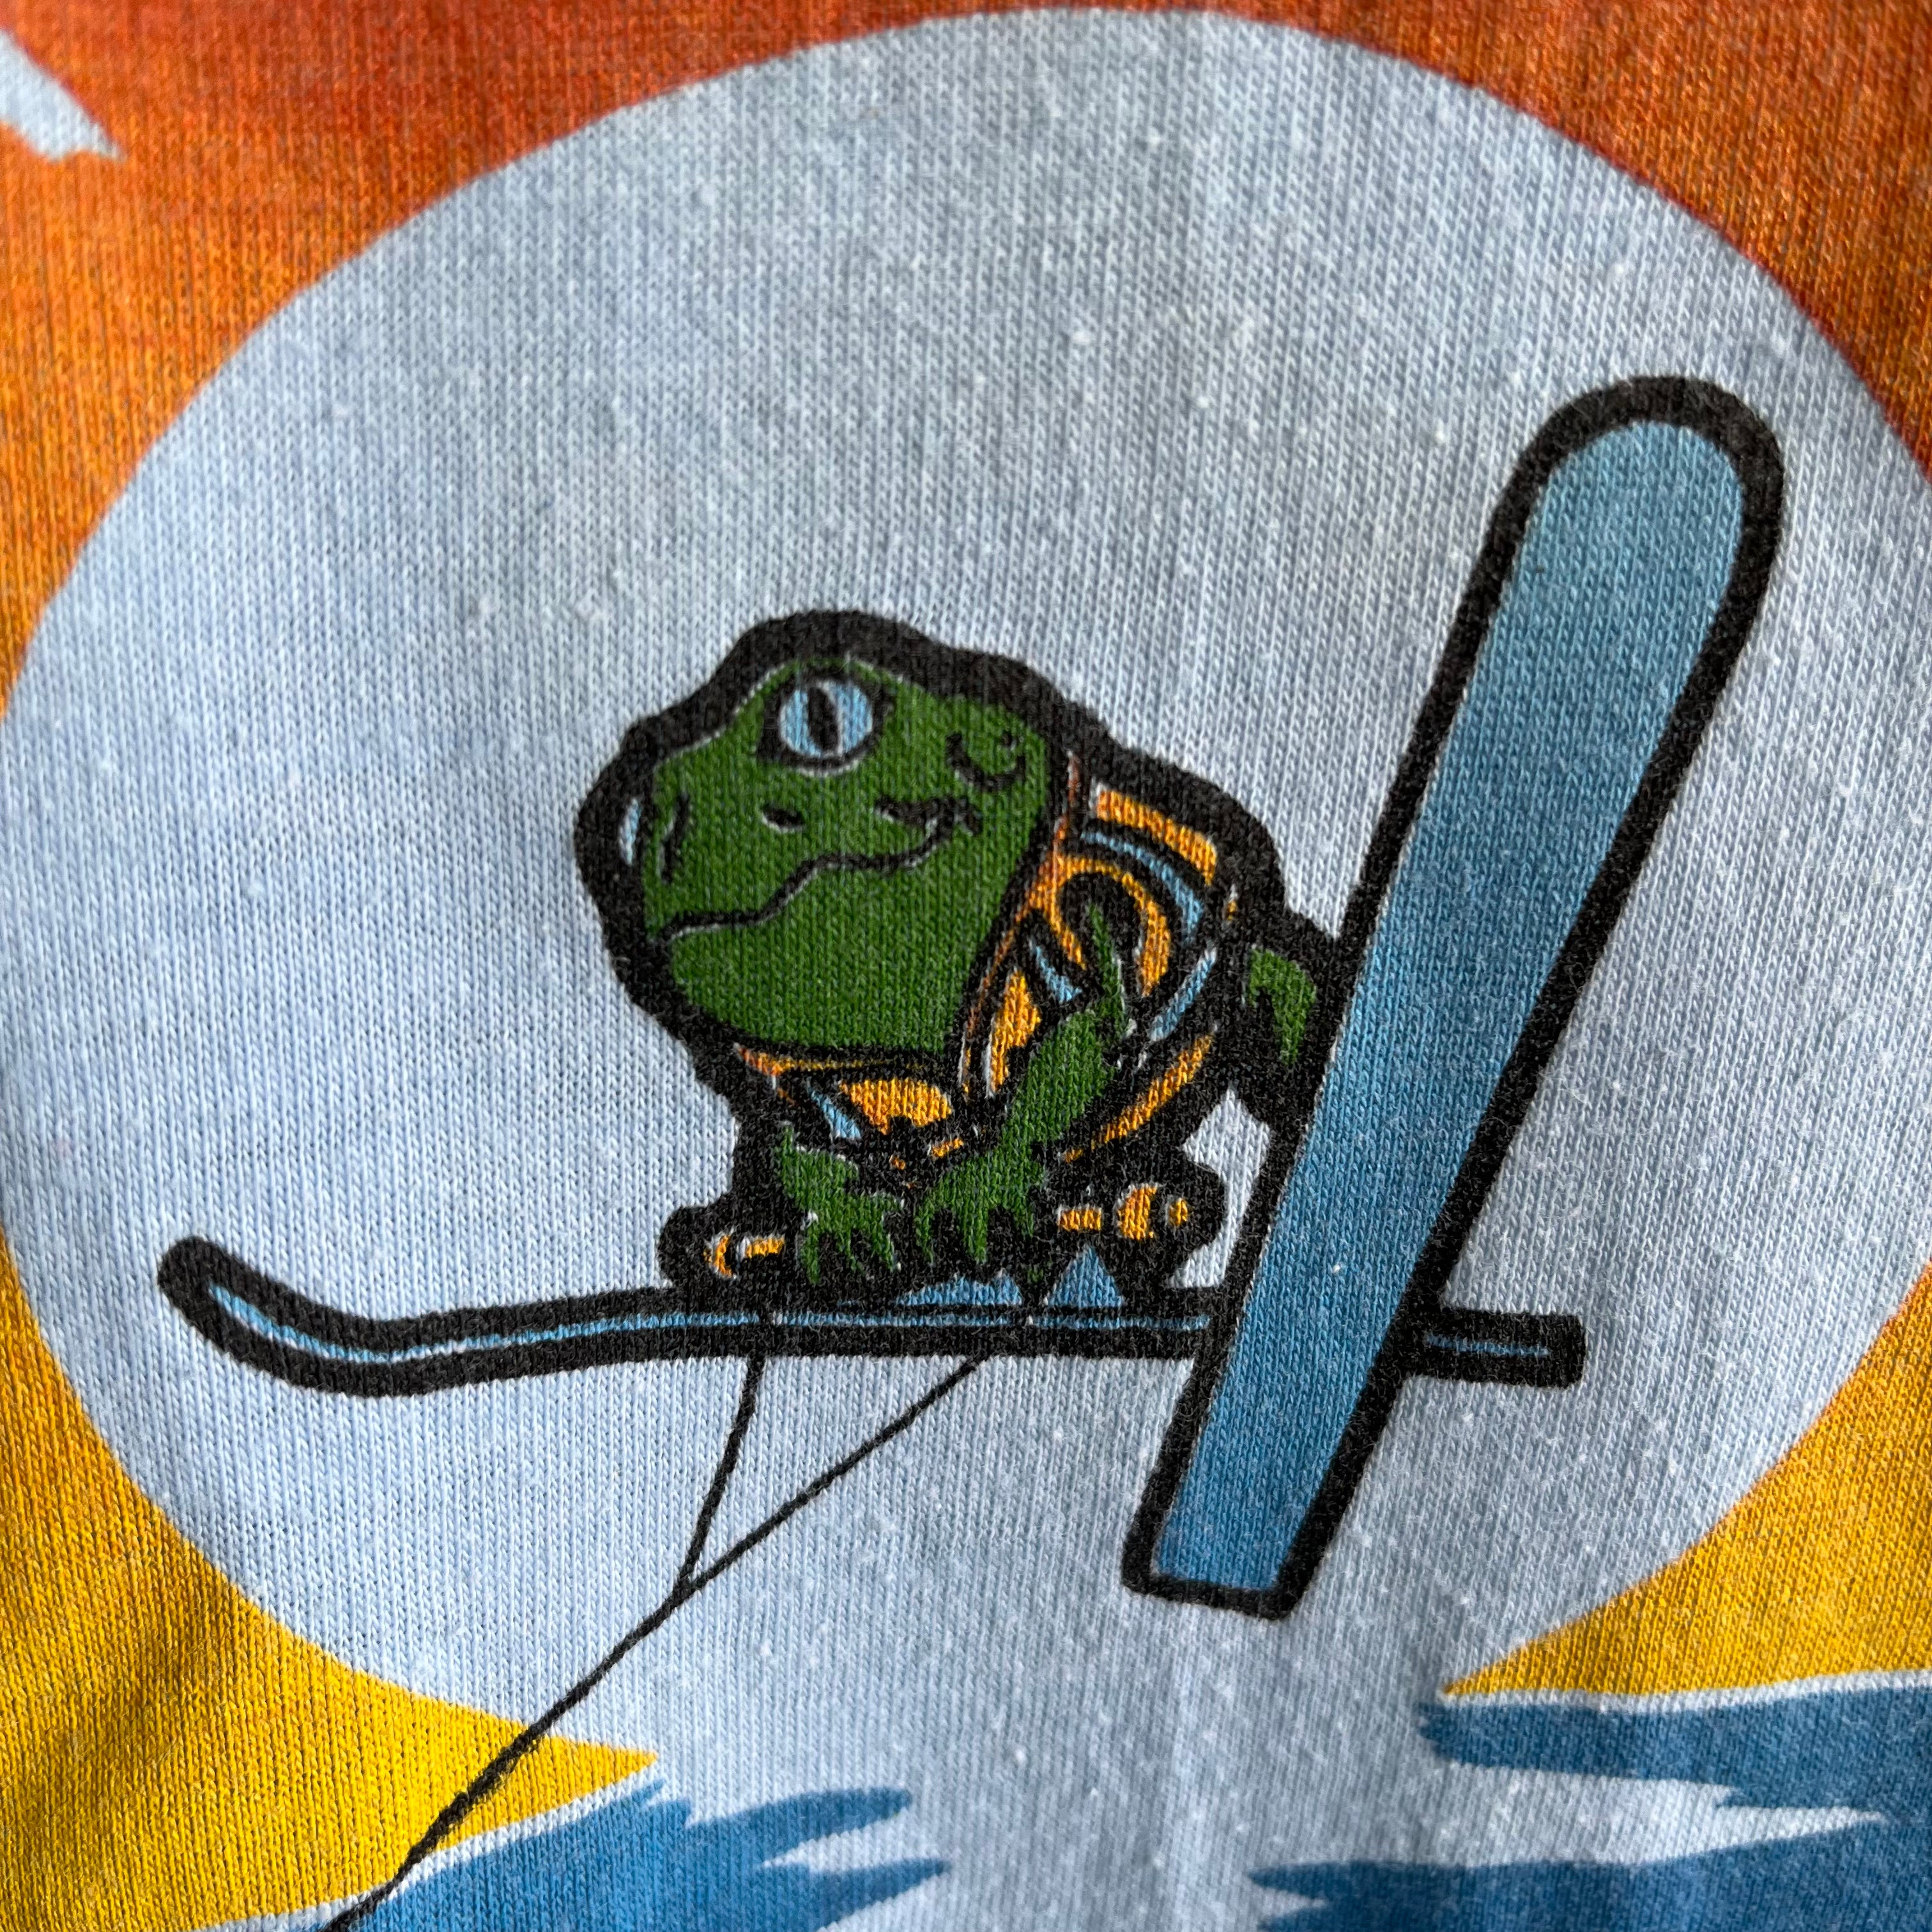 1980s Frog Water Skiing with a Life Vest On, No Big Deal